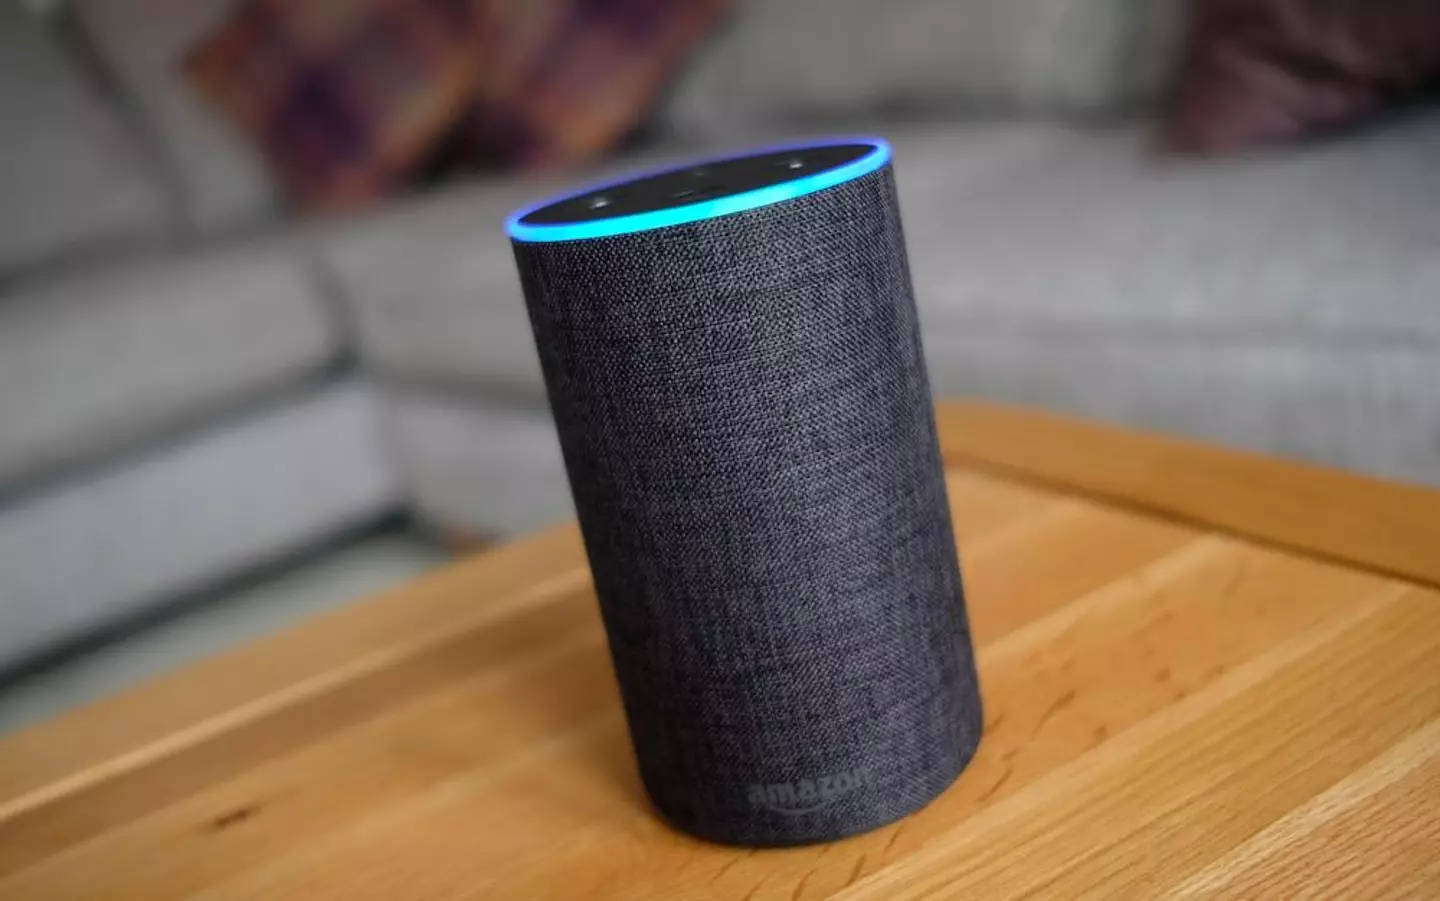 The man left his daughter alone with an Amazon Alexa by her bed.